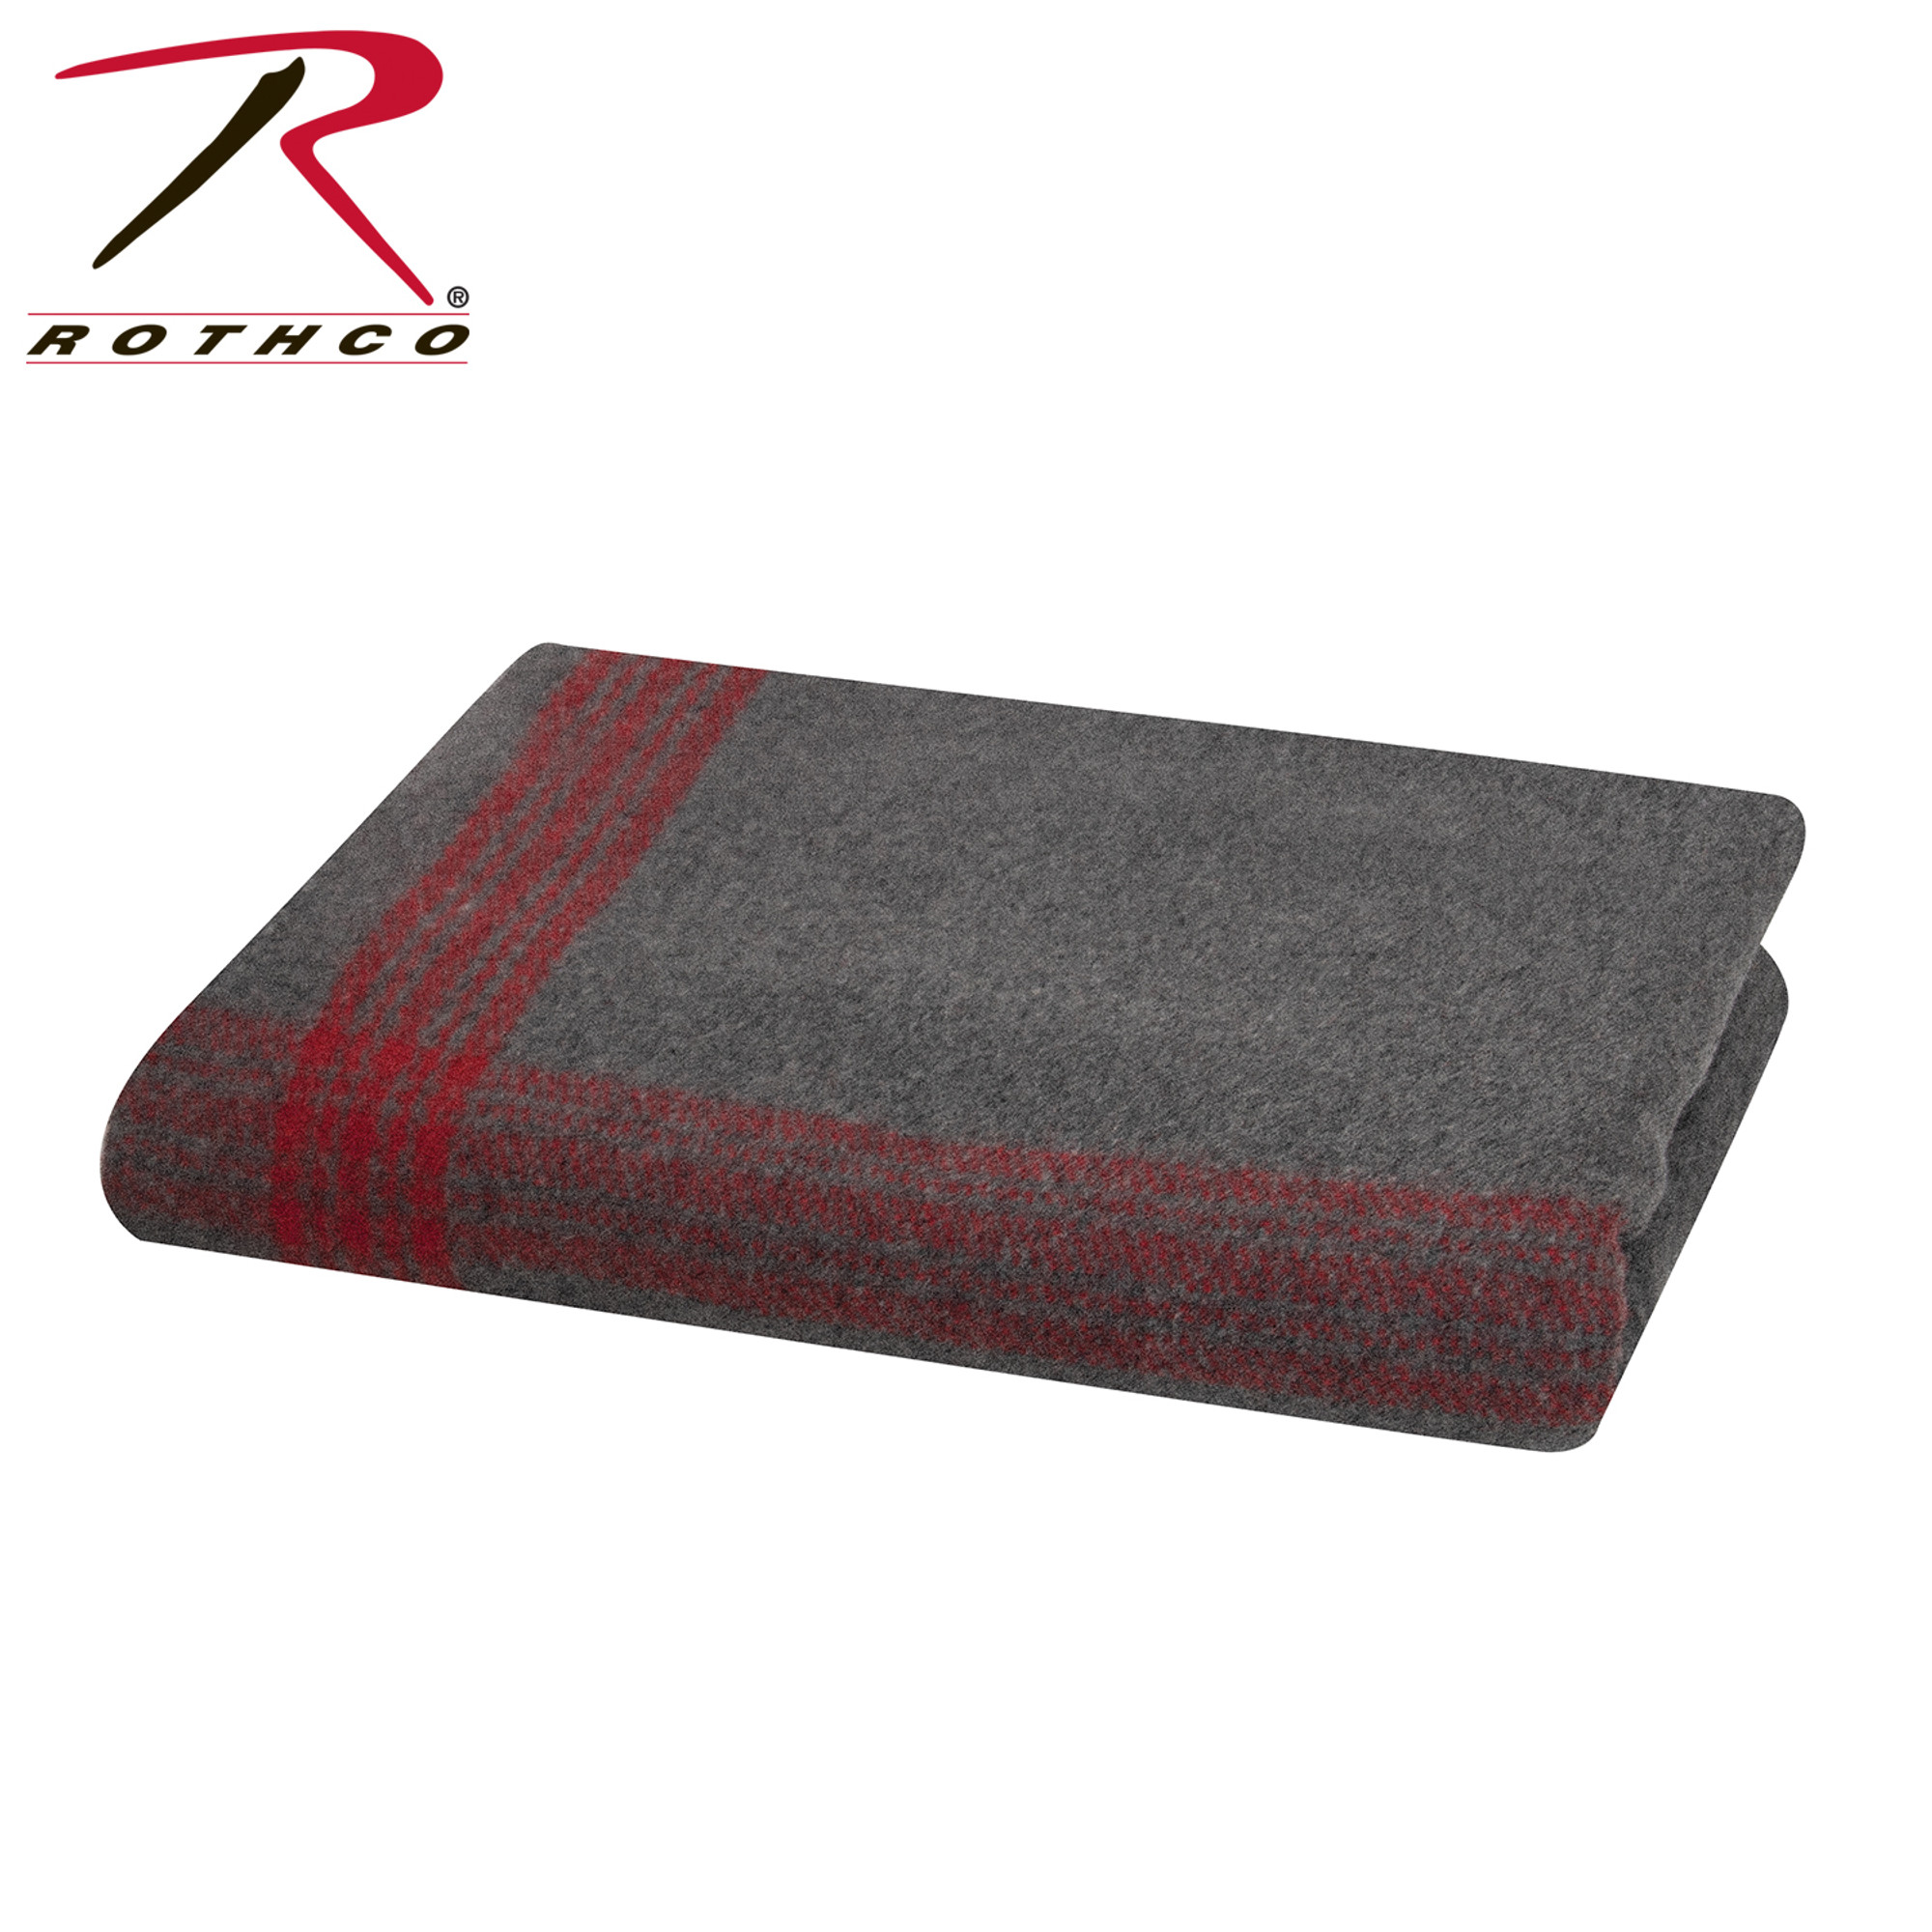 Rothco Striped Wool Blanket - Grey/Red